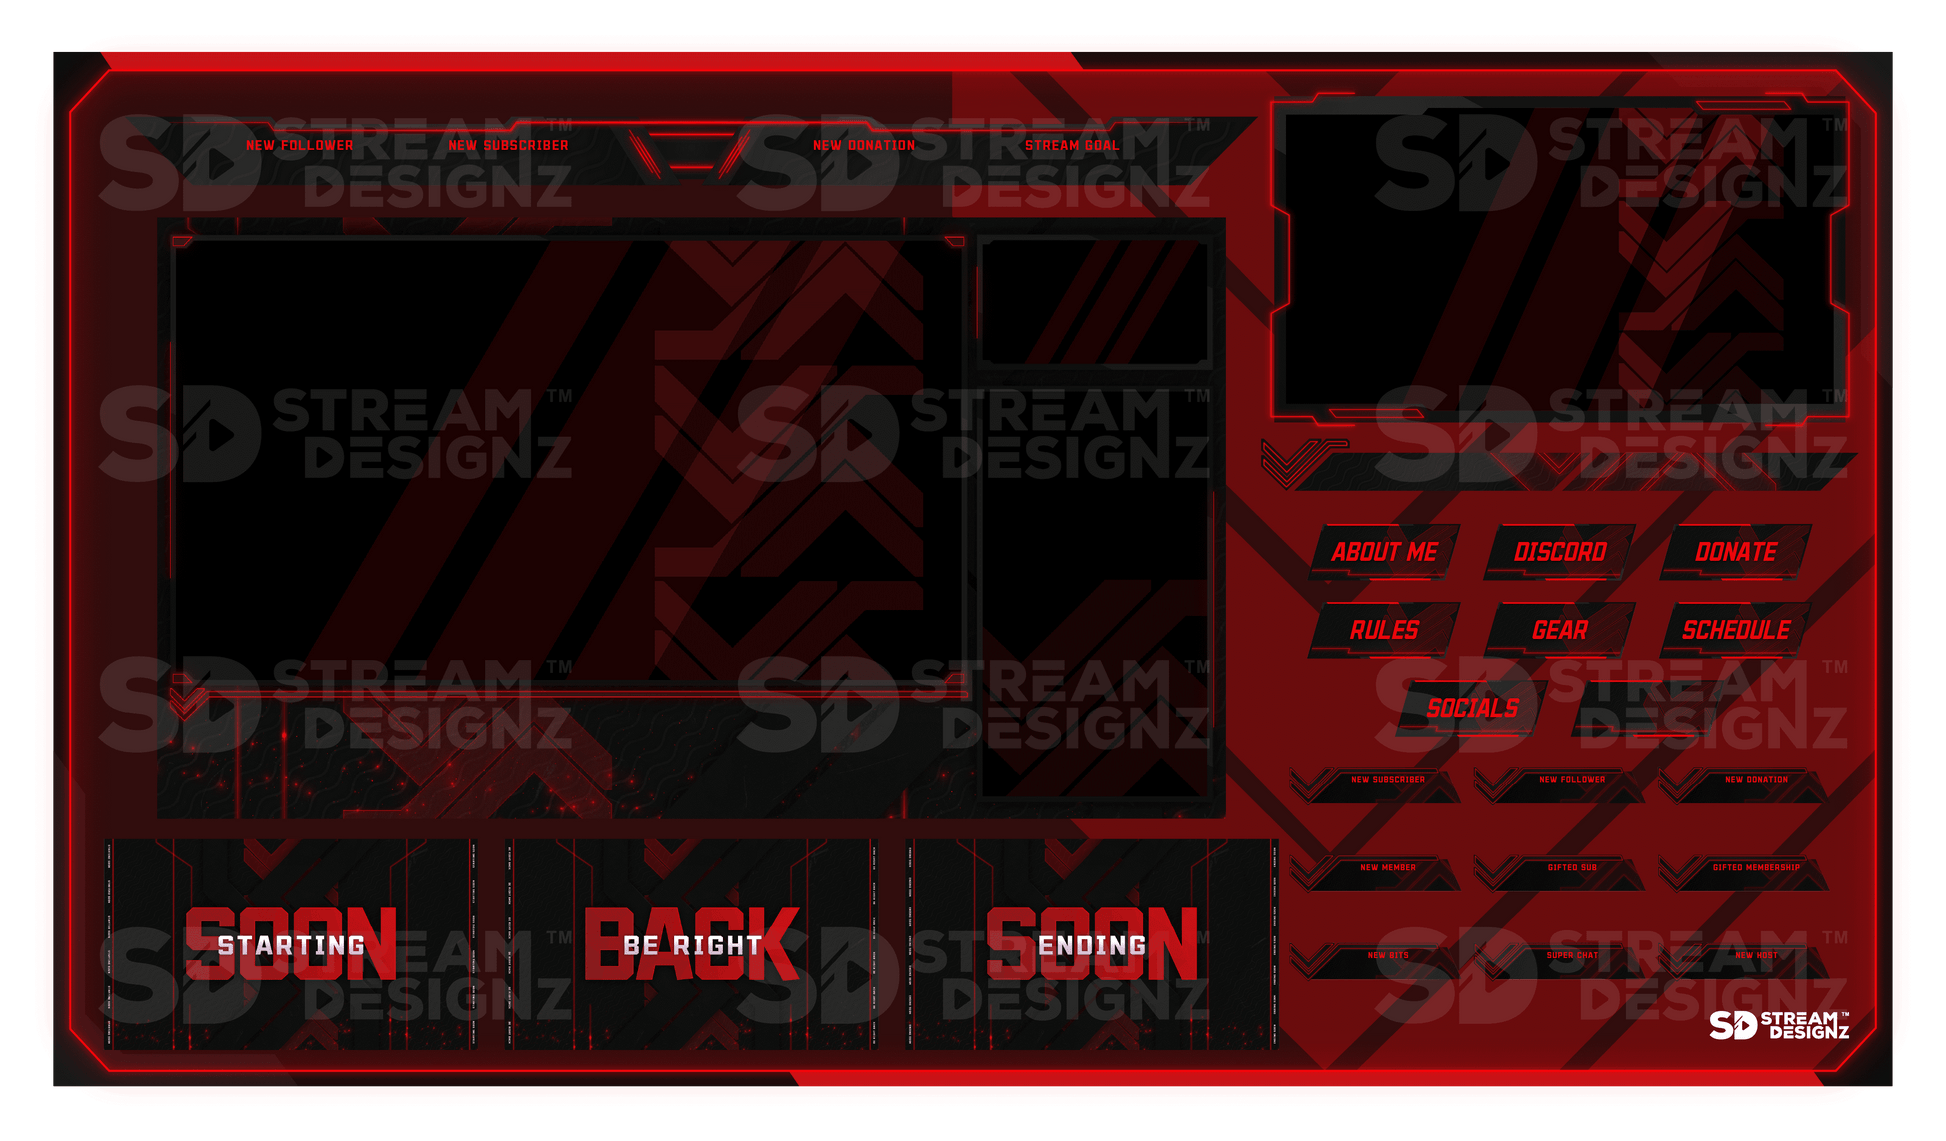 static stream overlay package feature image code red stream designz